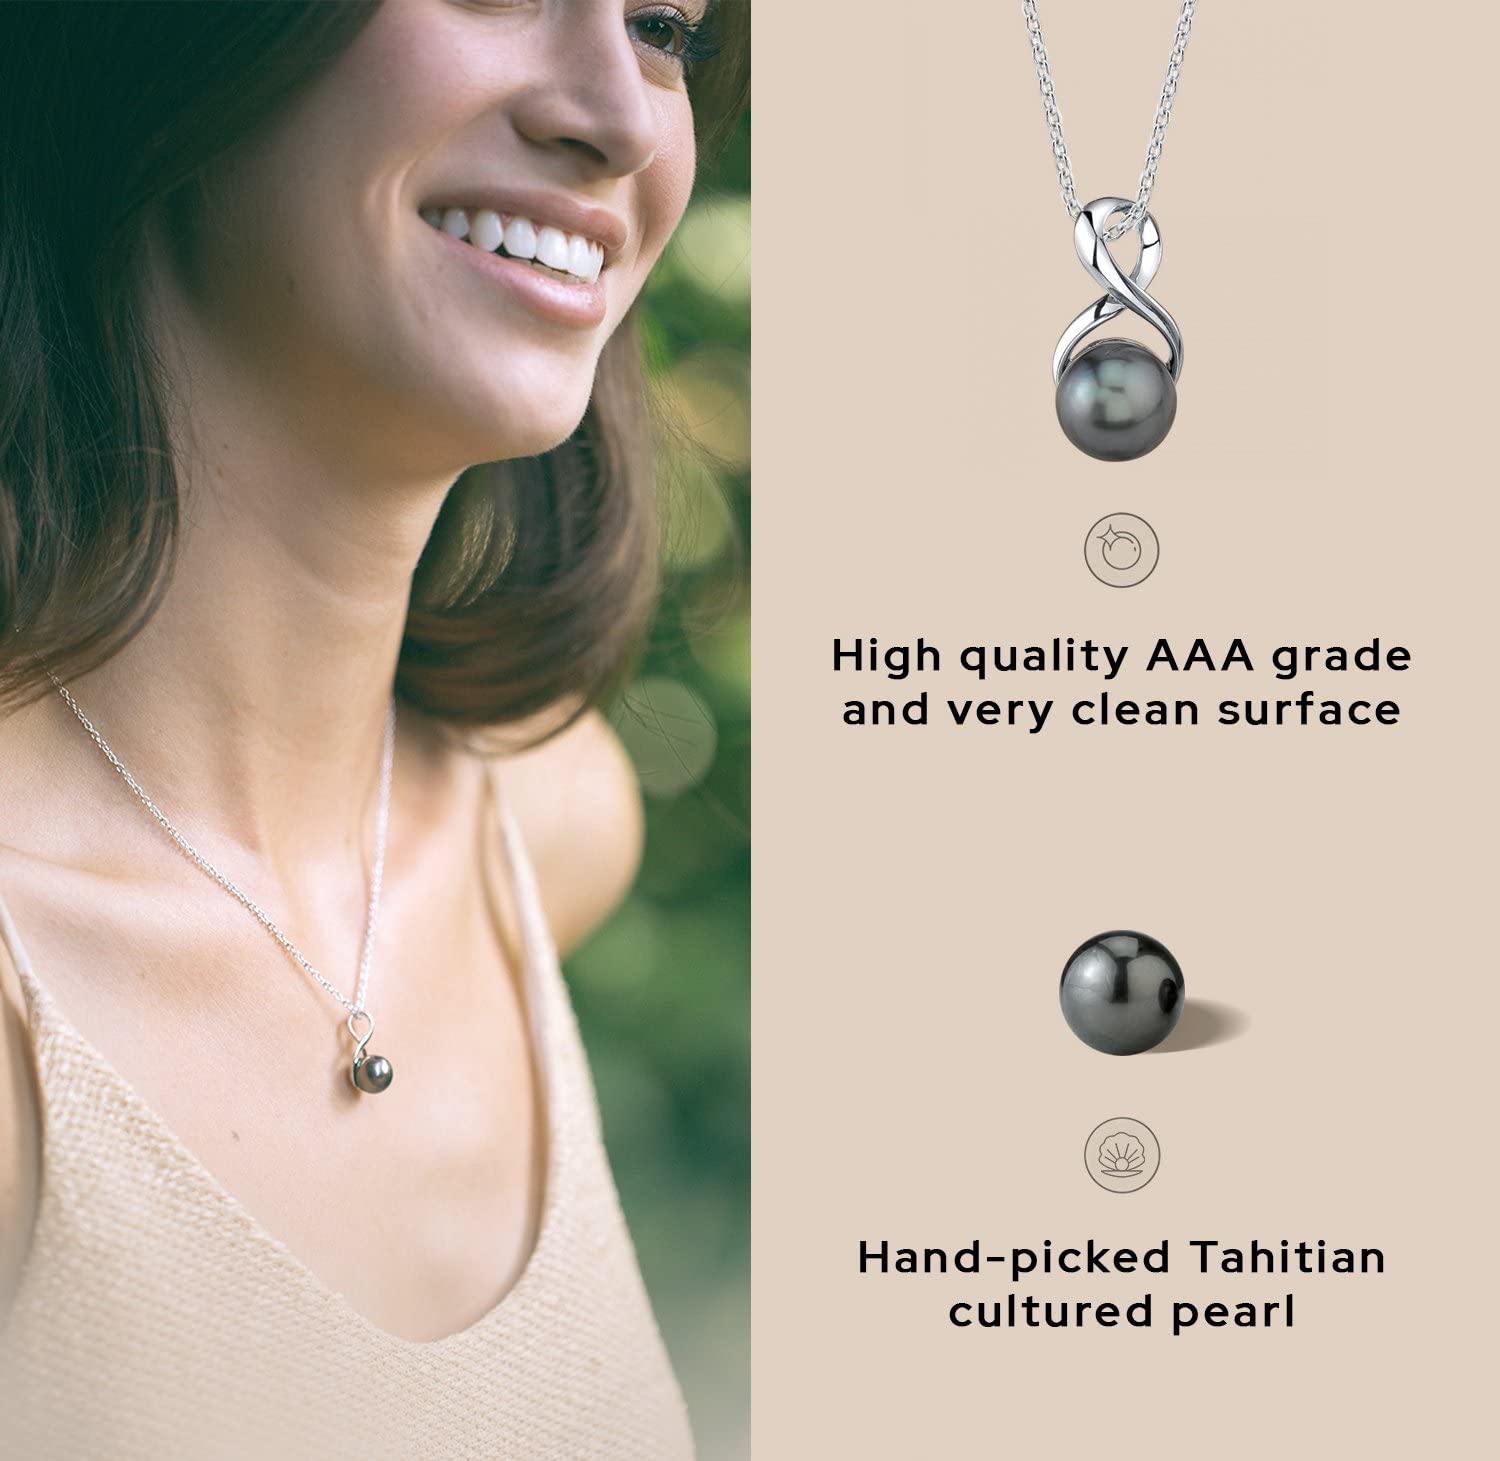 The Pearl Source Real Pearl Pendant for Women with Genuine AAA Quality Black Tahitian Cultured Pearl with Infinity Design | 14K Gold Plated 925 Sterling Silver Necklace